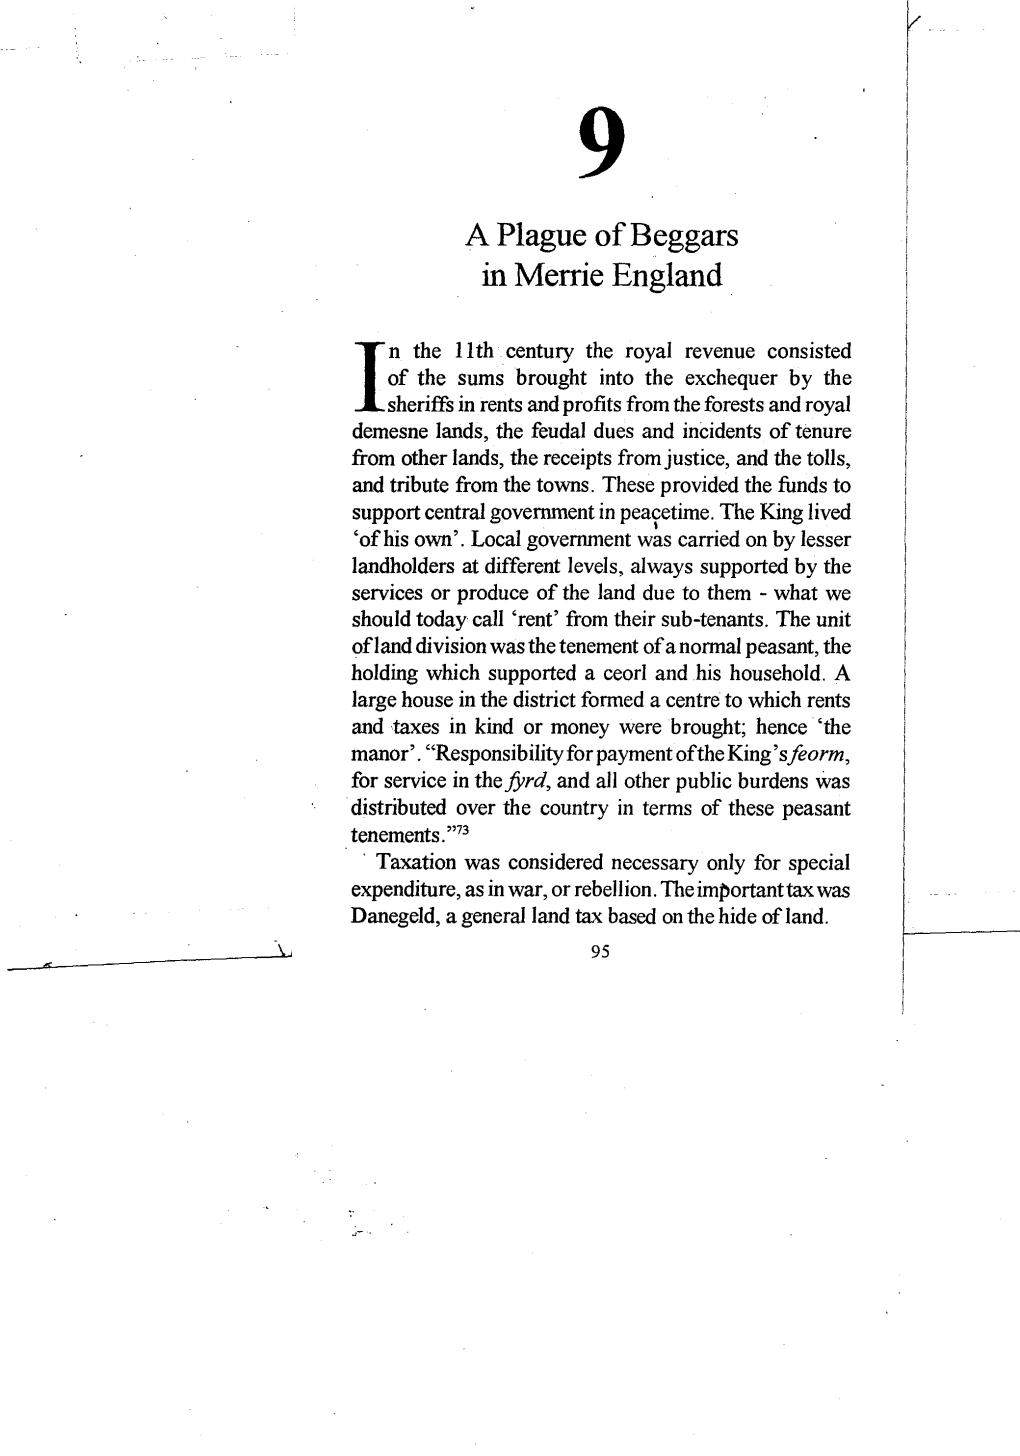 A Plague of Beggars in Merrie England